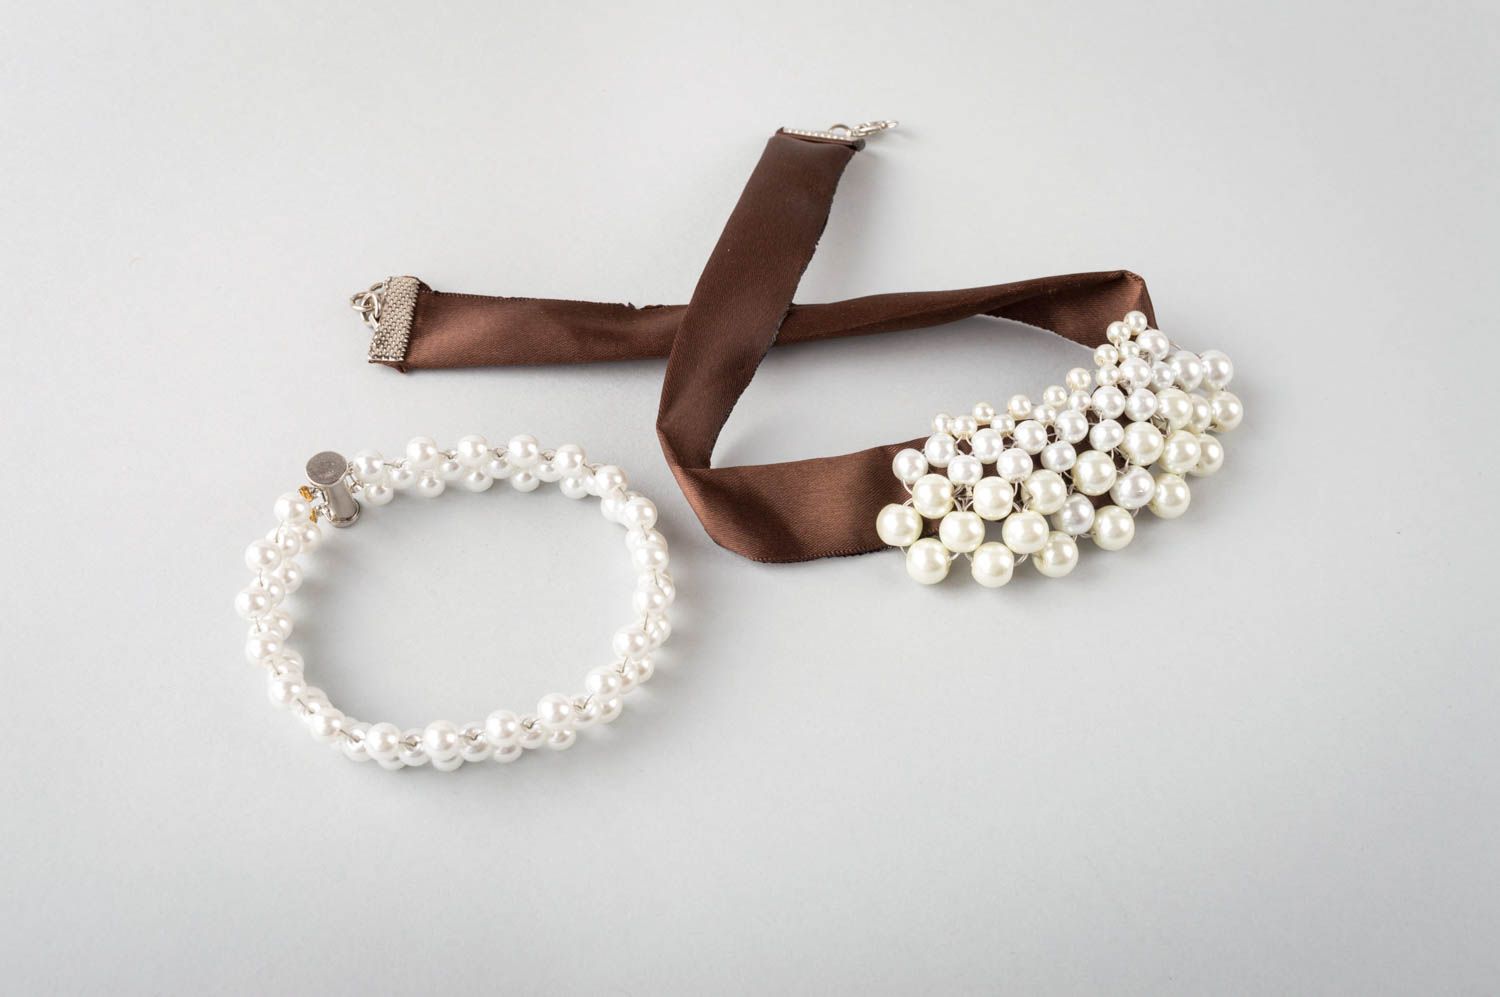 Handmade set of jewelry accessory made of Venetian pearls necklace and bracelet photo 3